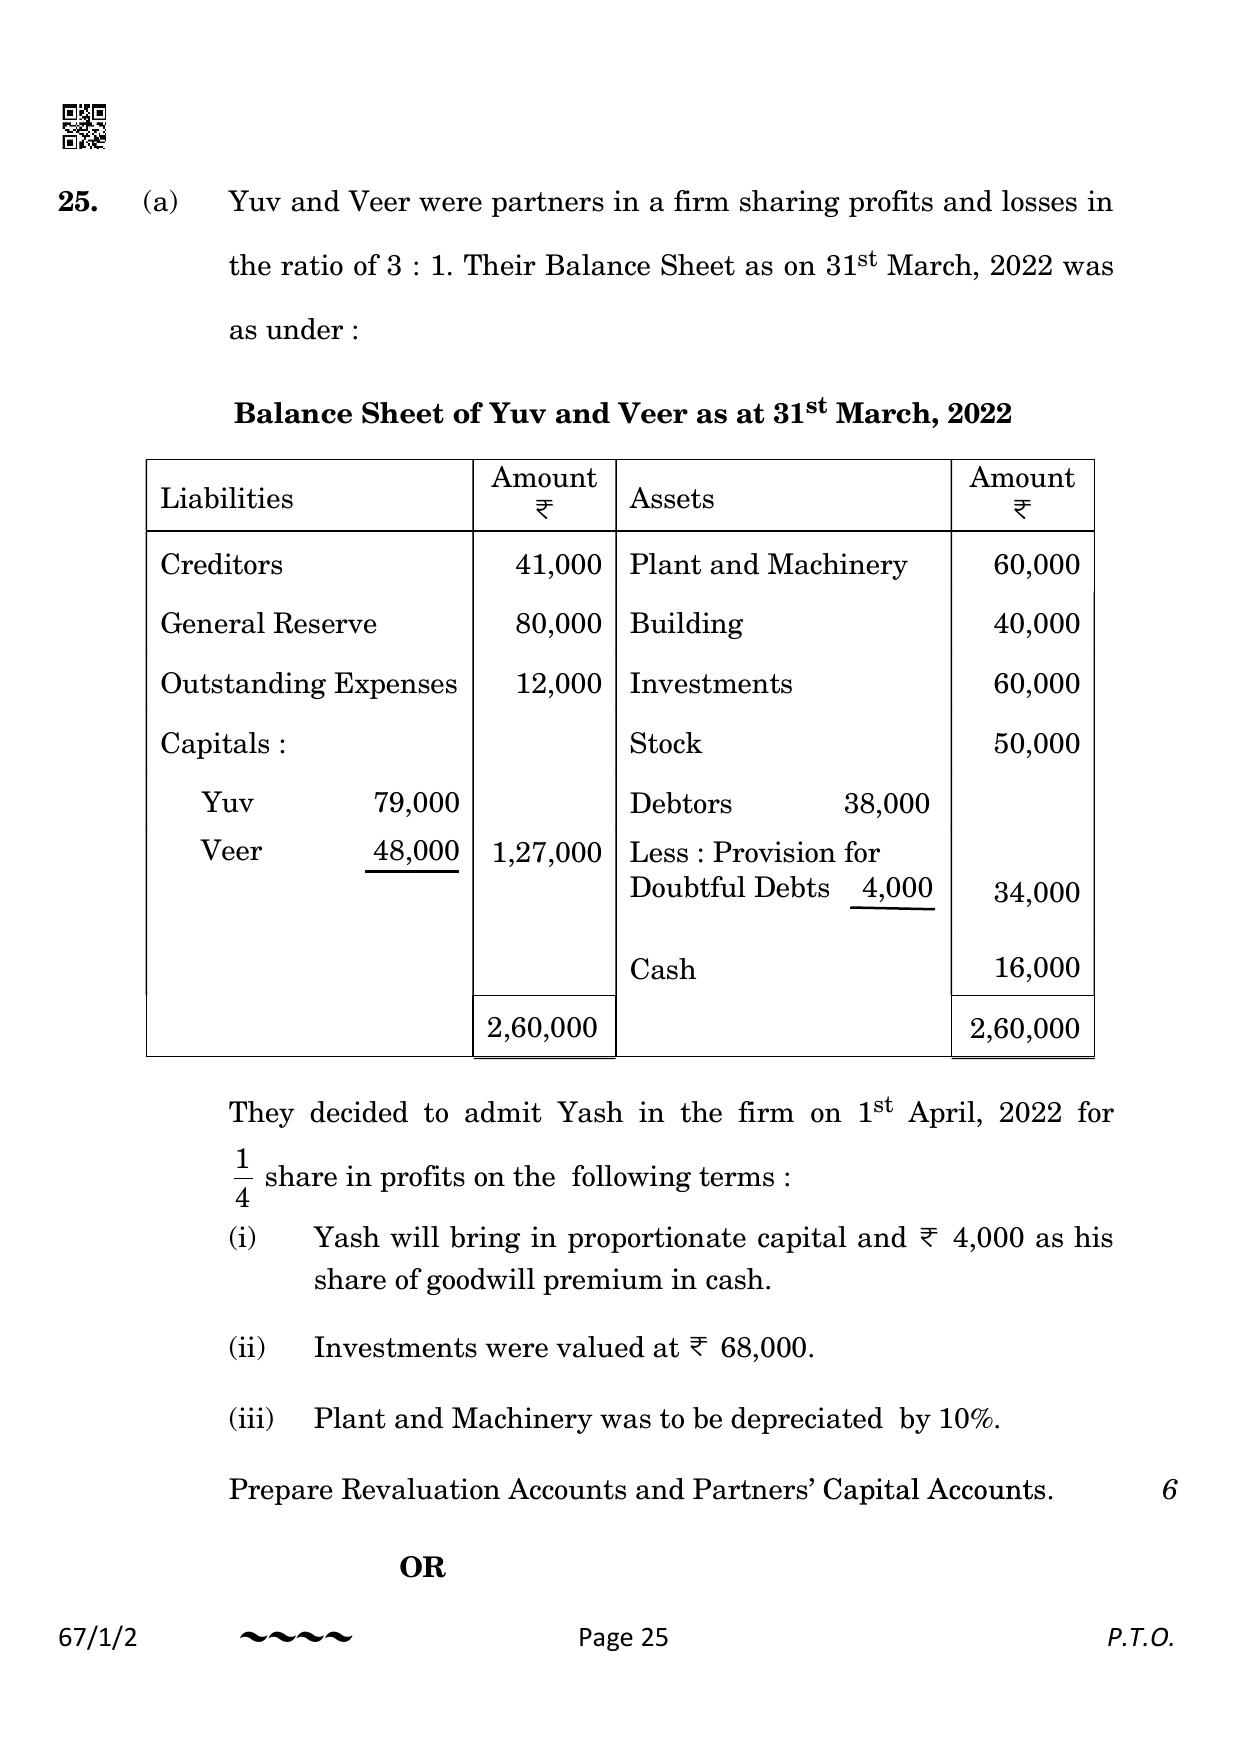 CBSE Class 12 67-1-2 Accountancy 2023 Question Paper - Page 25